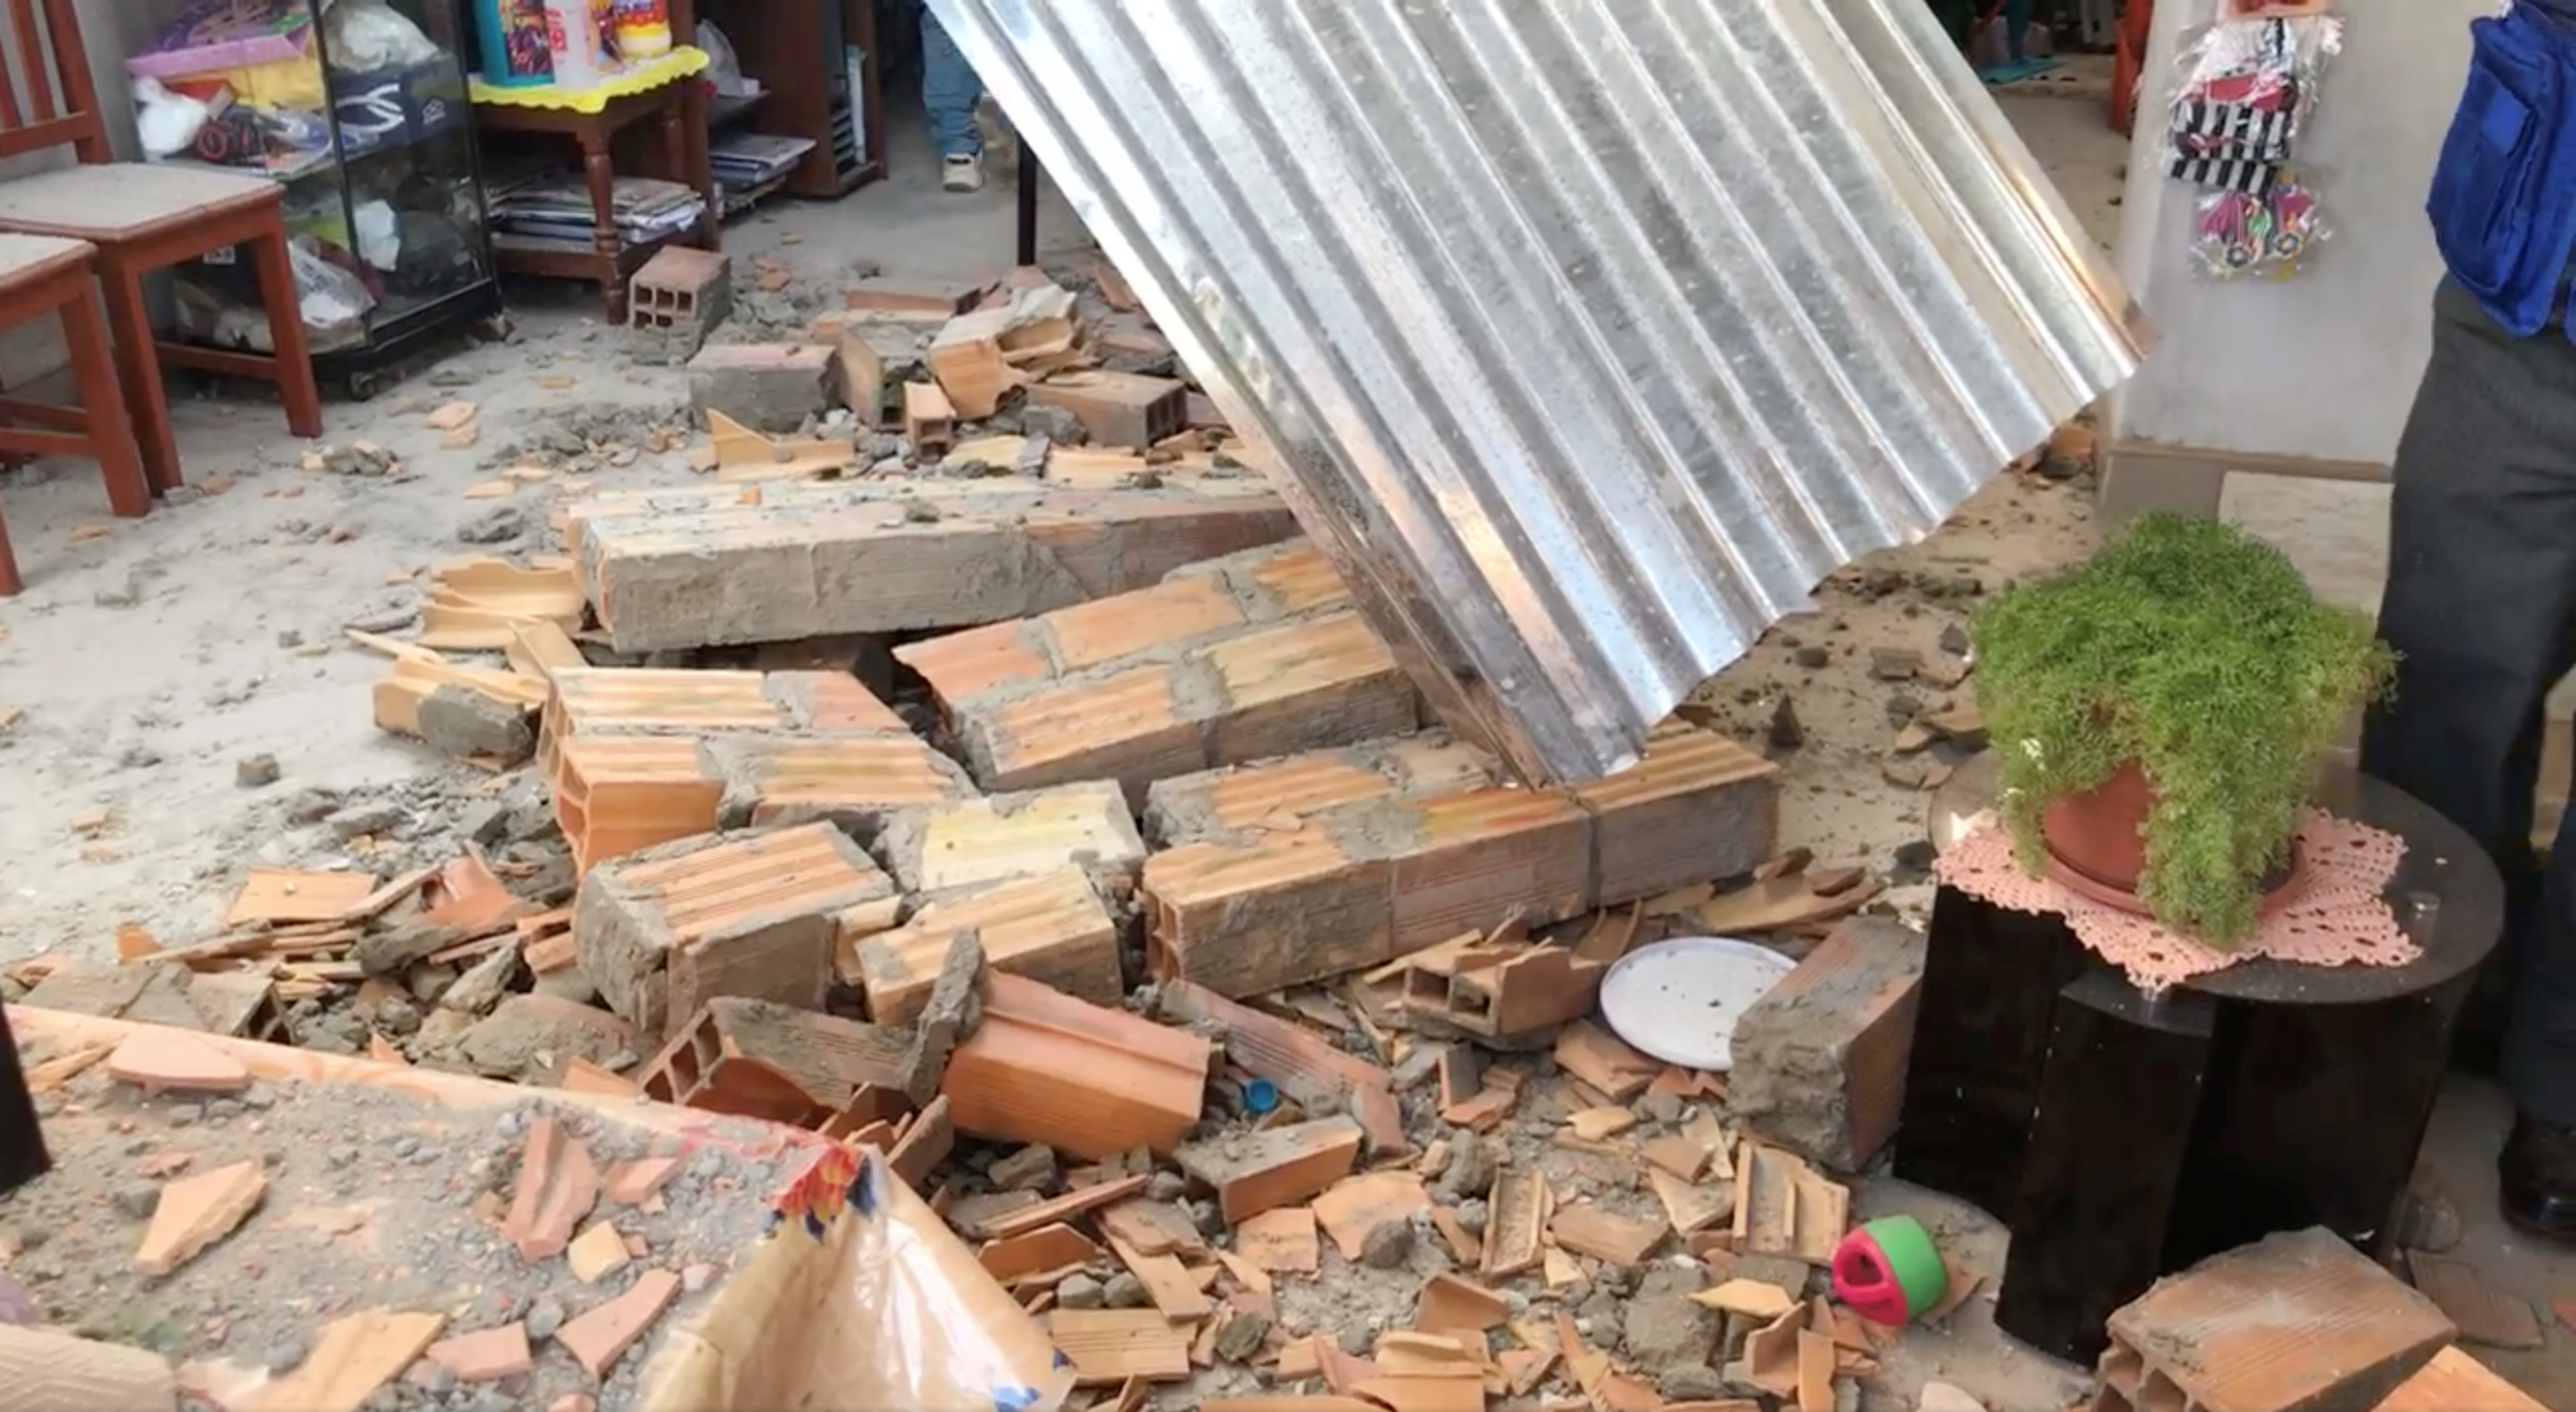 Damages are seen after an earthquake in Moyobamba, Peru